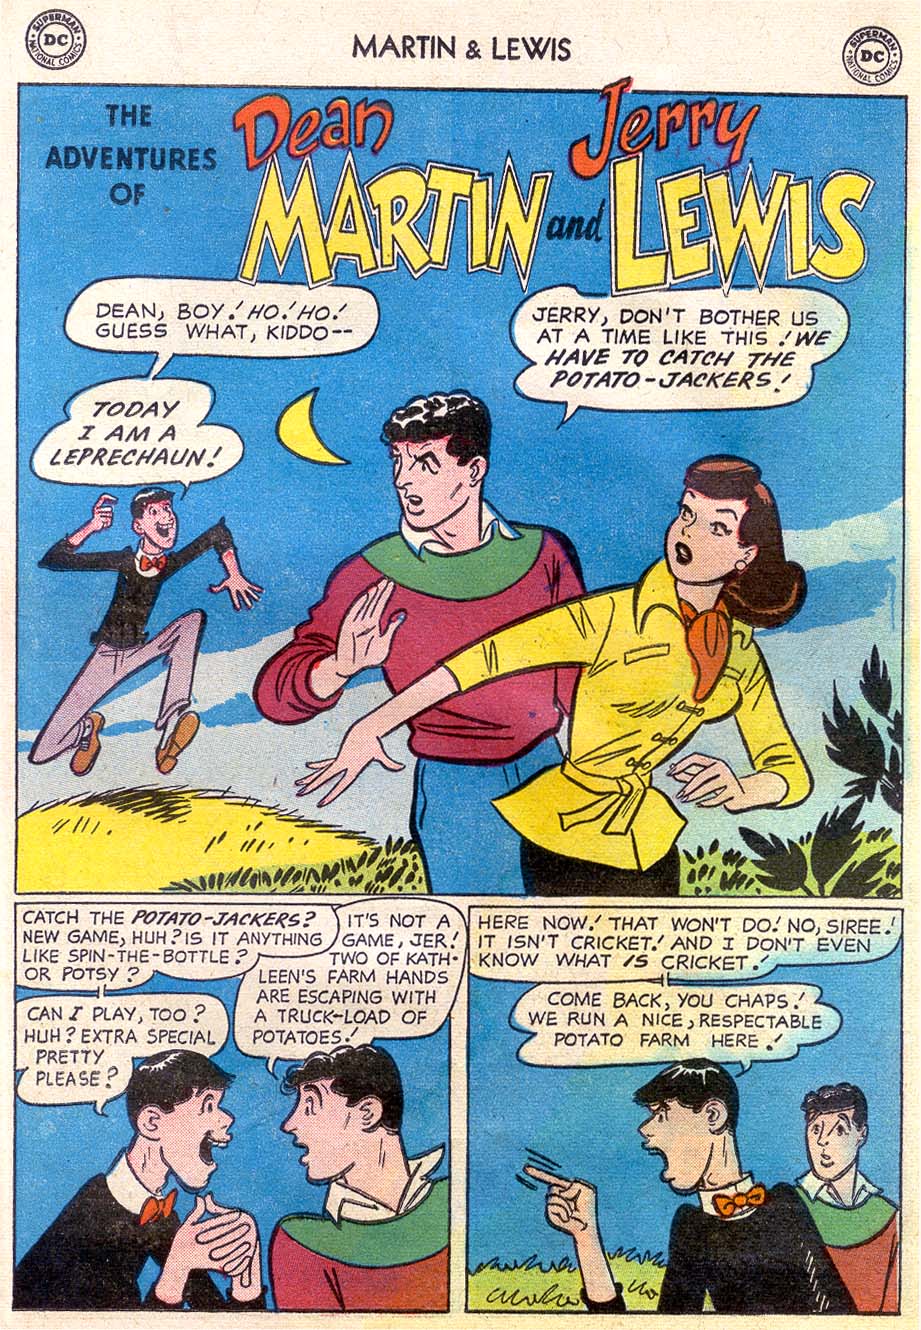 Read online The Adventures of Dean Martin and Jerry Lewis comic -  Issue #36 - 25